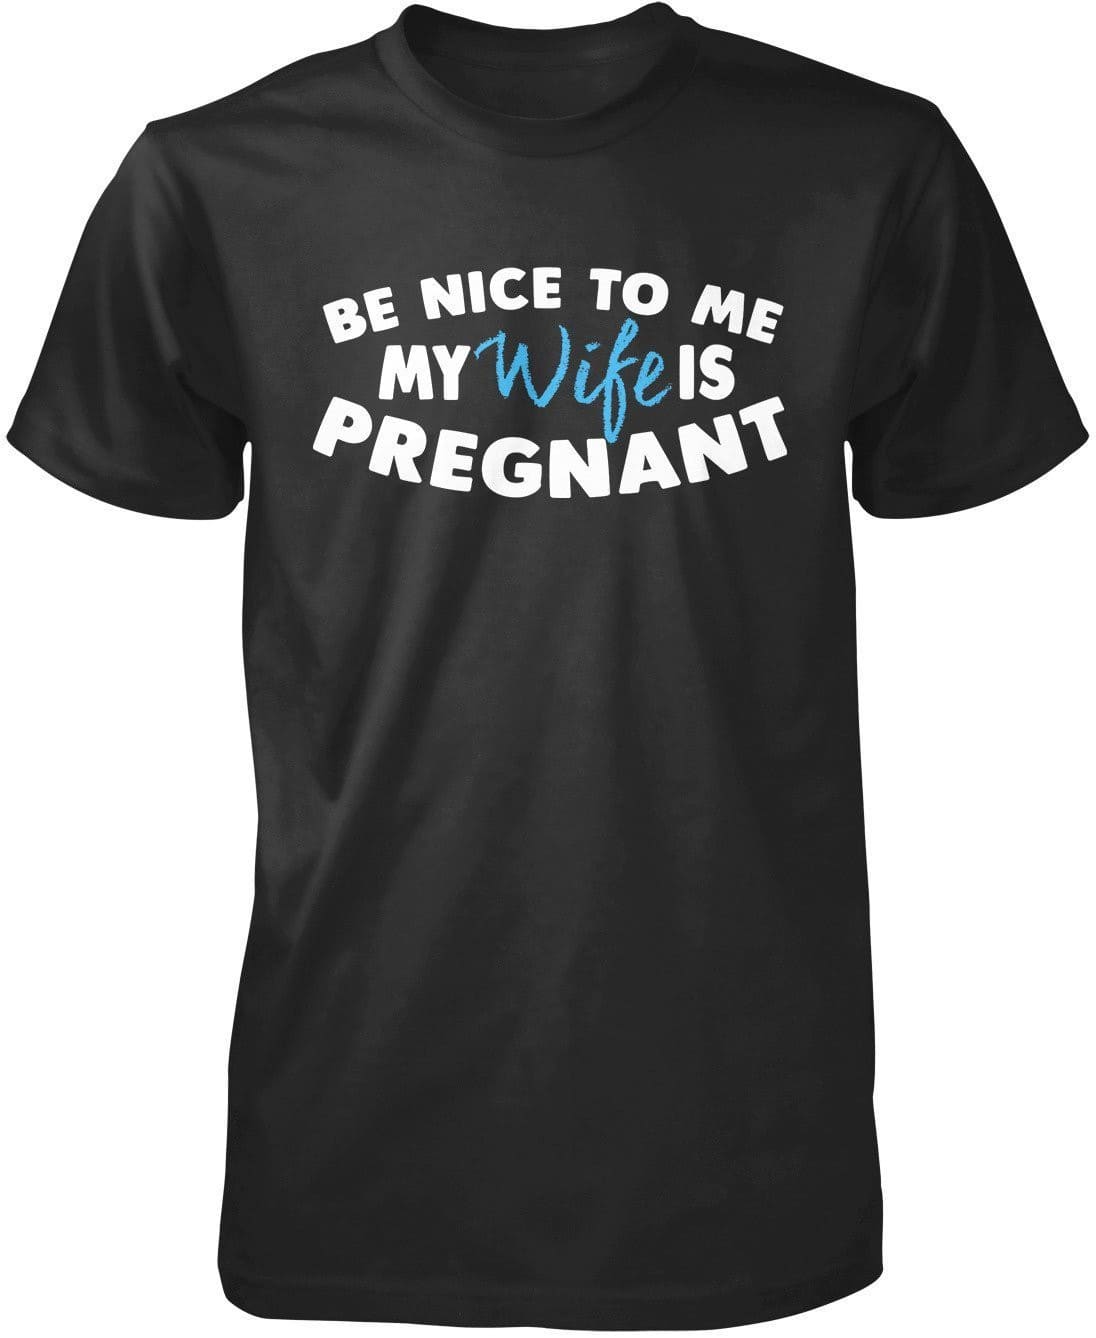 Be Nice to Me My Wife Is Pregnant T-Shirt